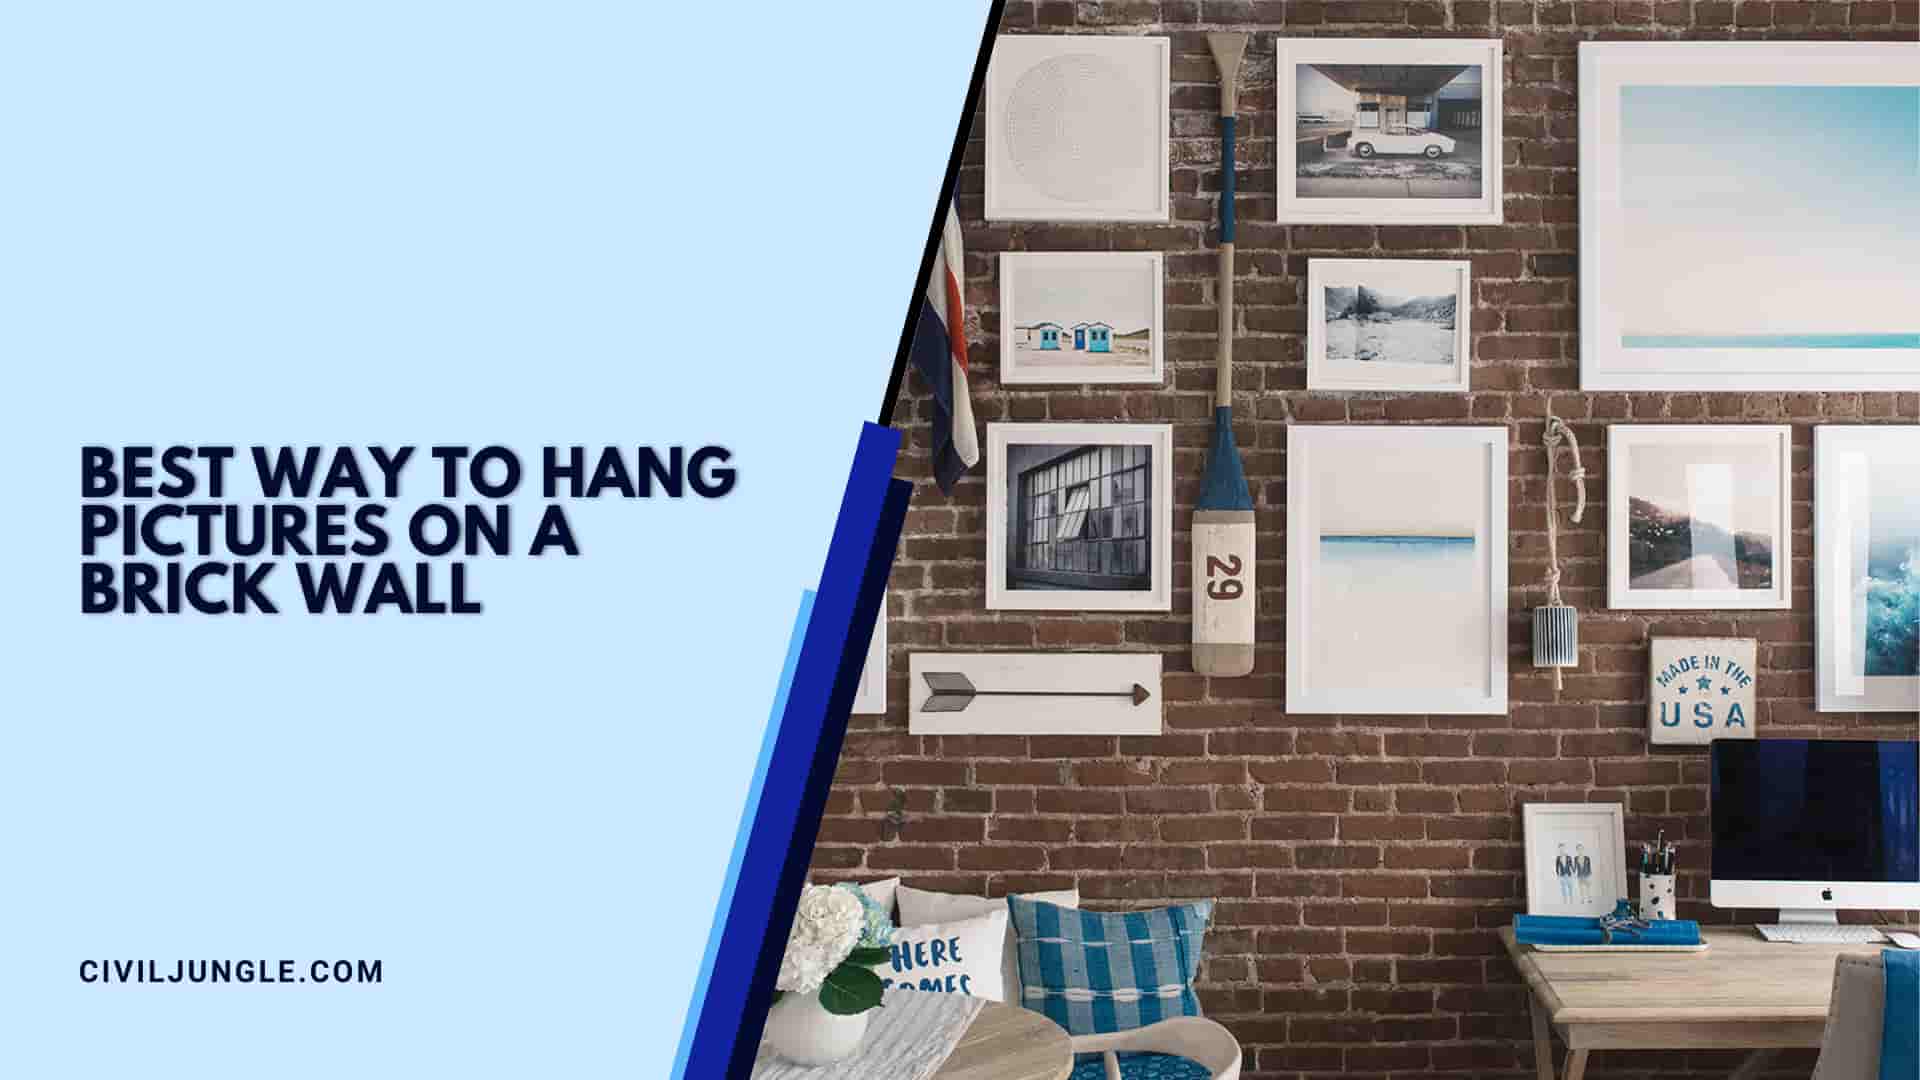 Best Way to Hang Pictures on a Brick Wall